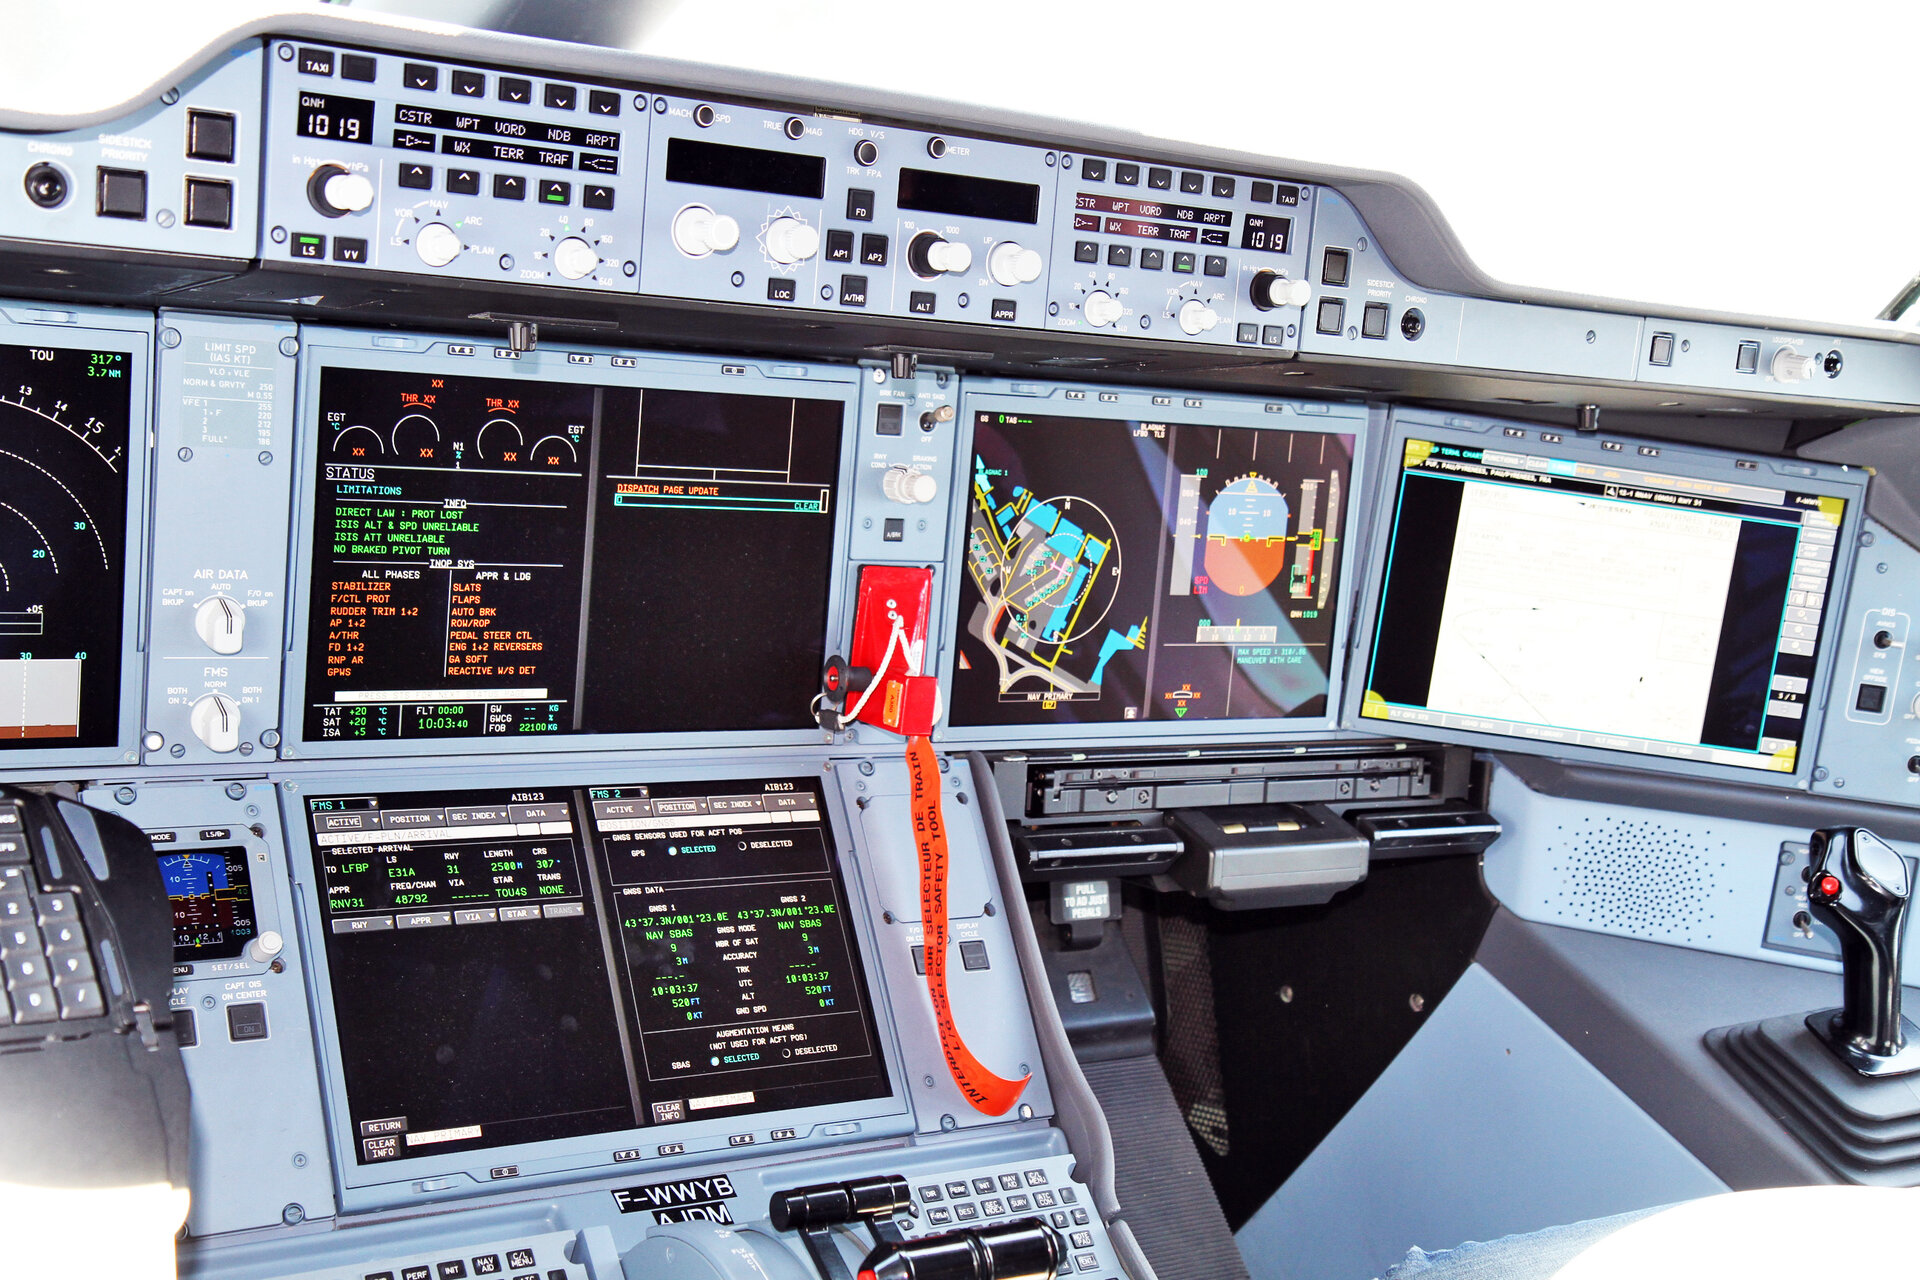 EGNOS-equipped cockpit